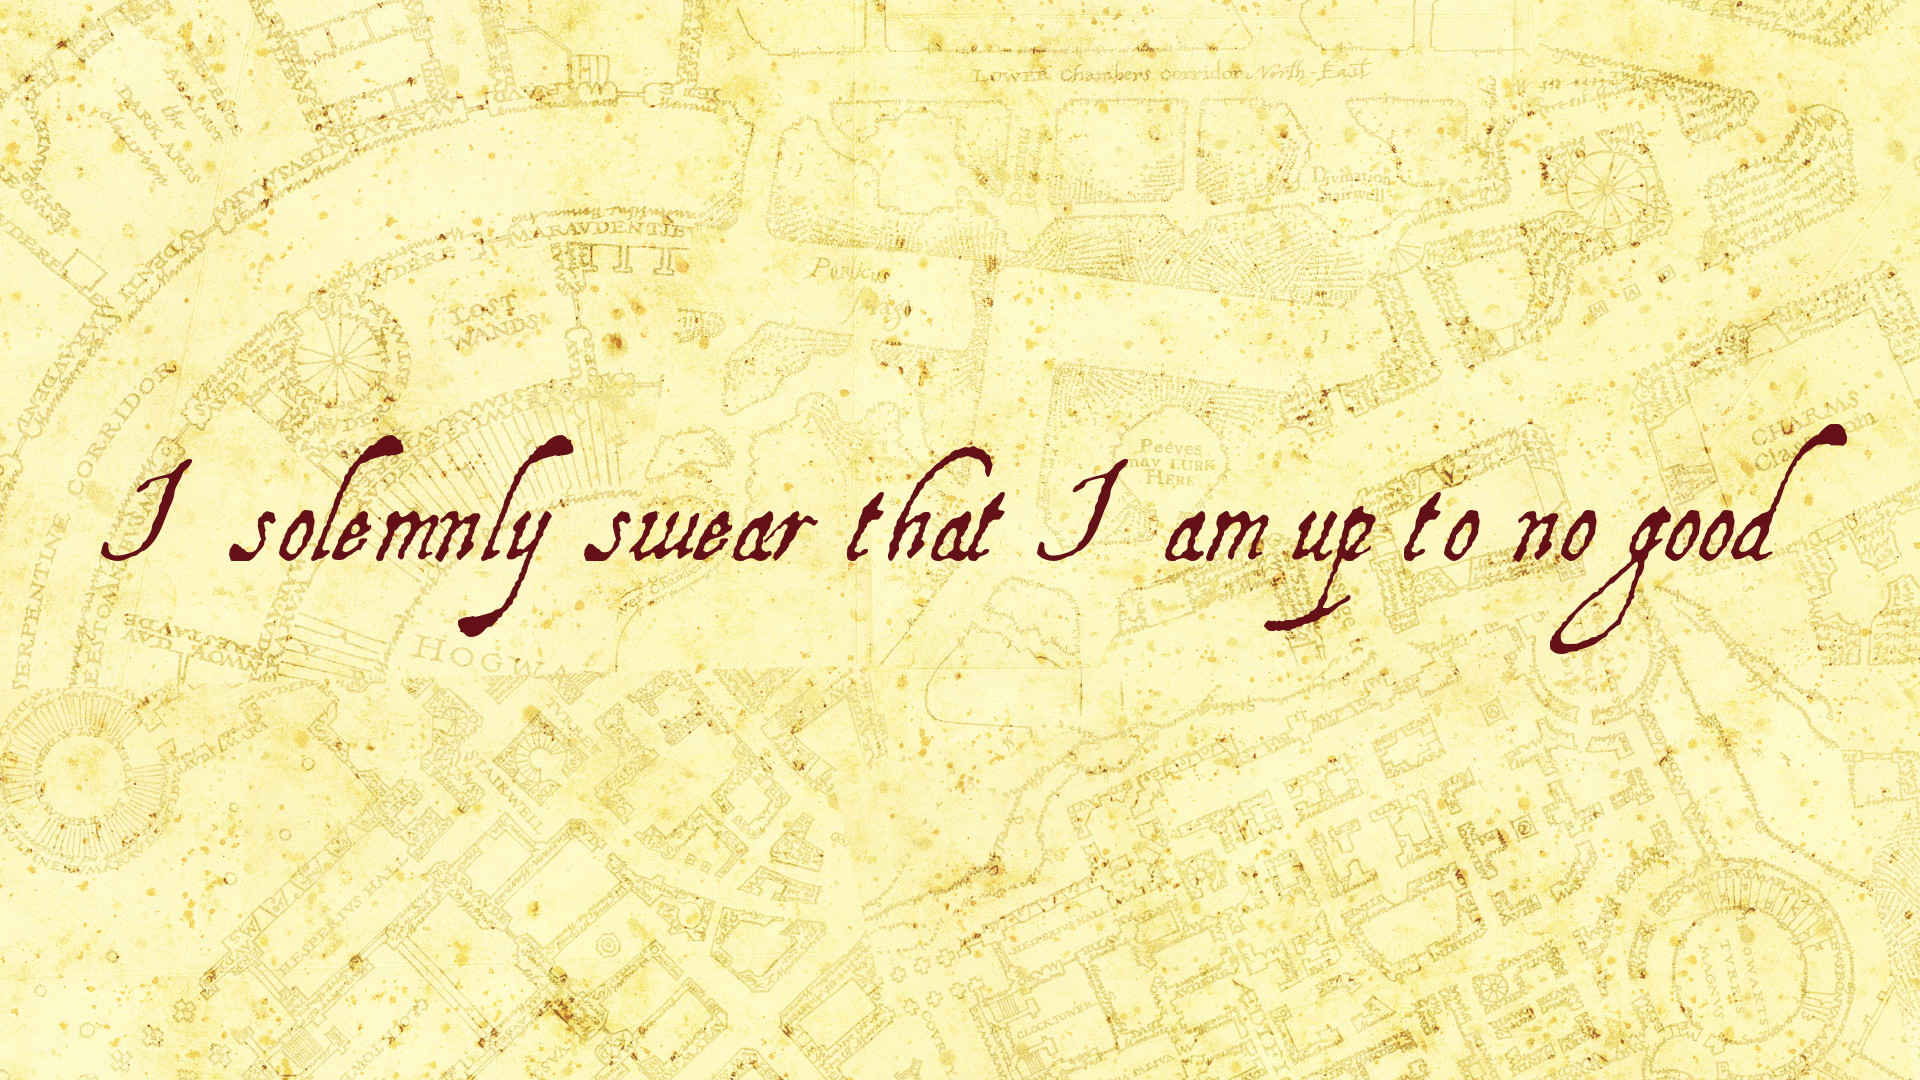 Harry Potter Quotes Wallpapers Phone Data Src Free - Solemnly Swear That I  Am Up - 1920x1080 Wallpaper 